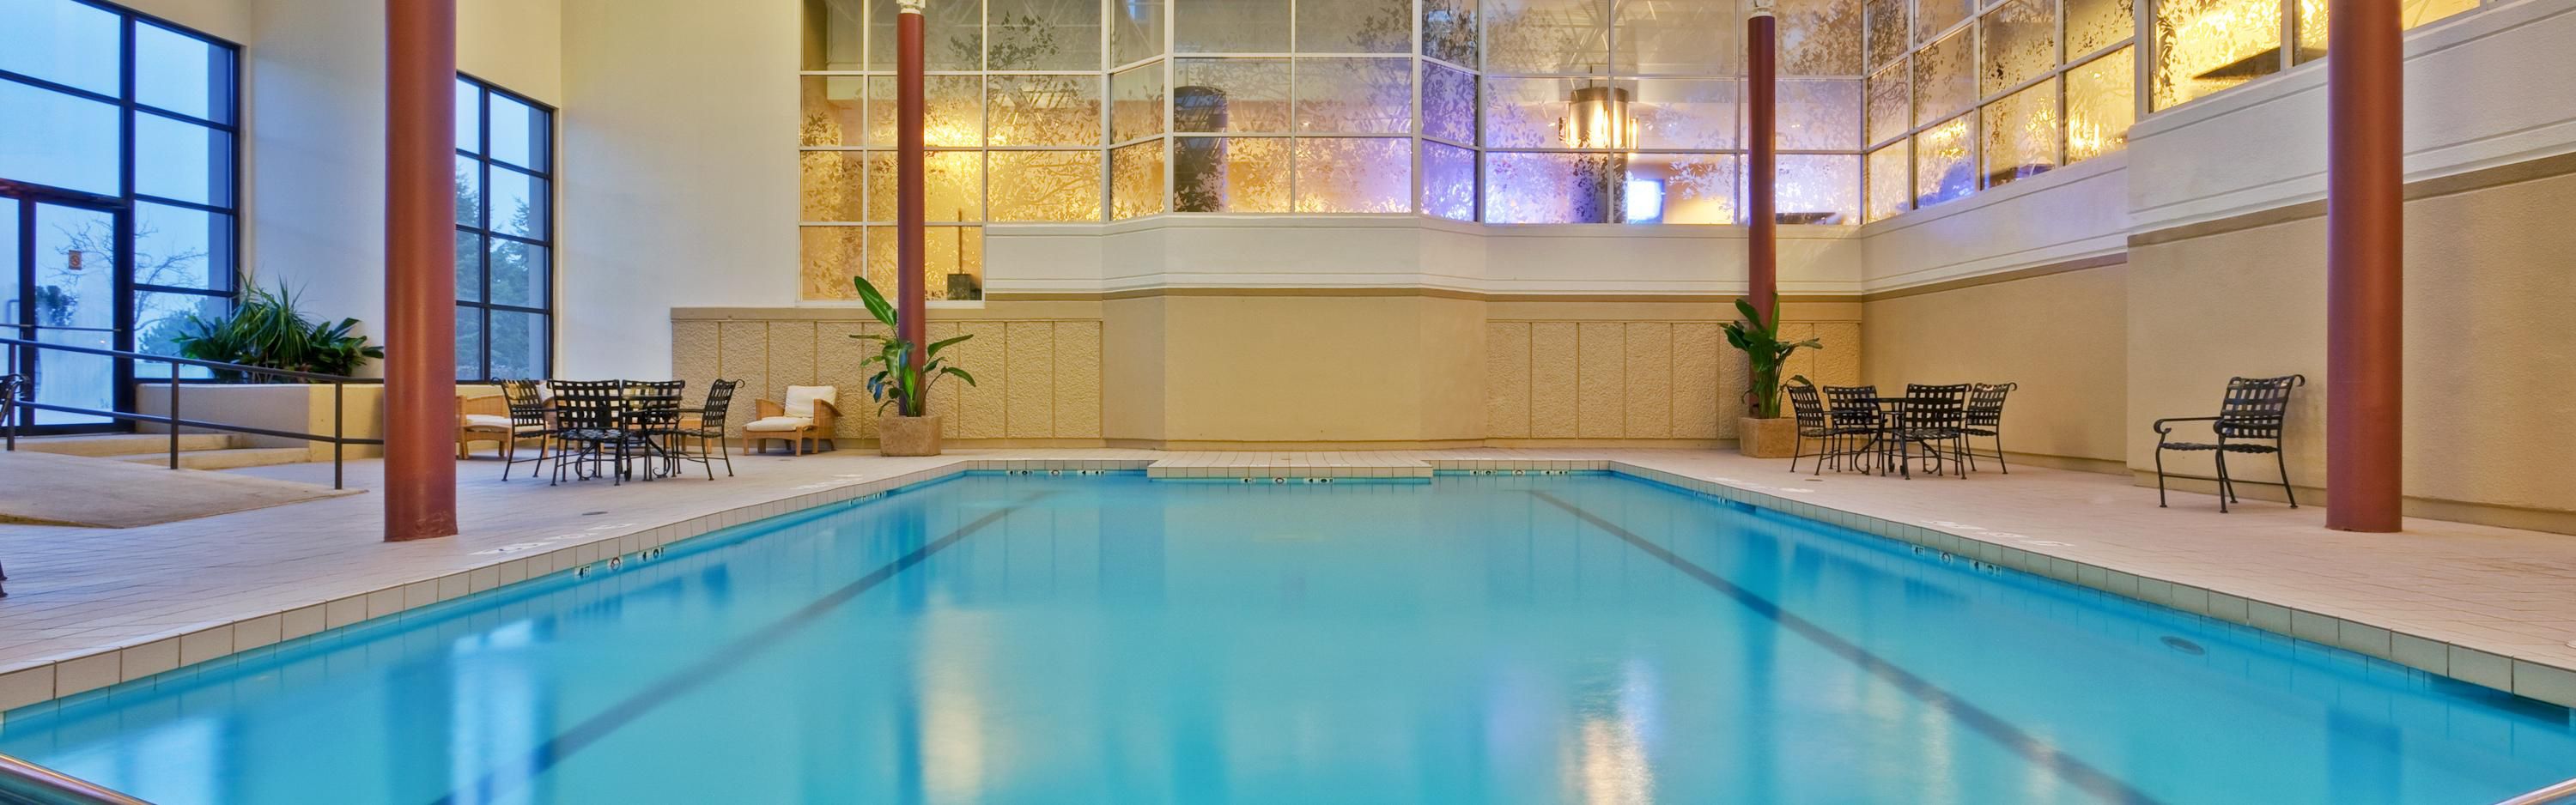 Indoor swimming pool with outdoor patio